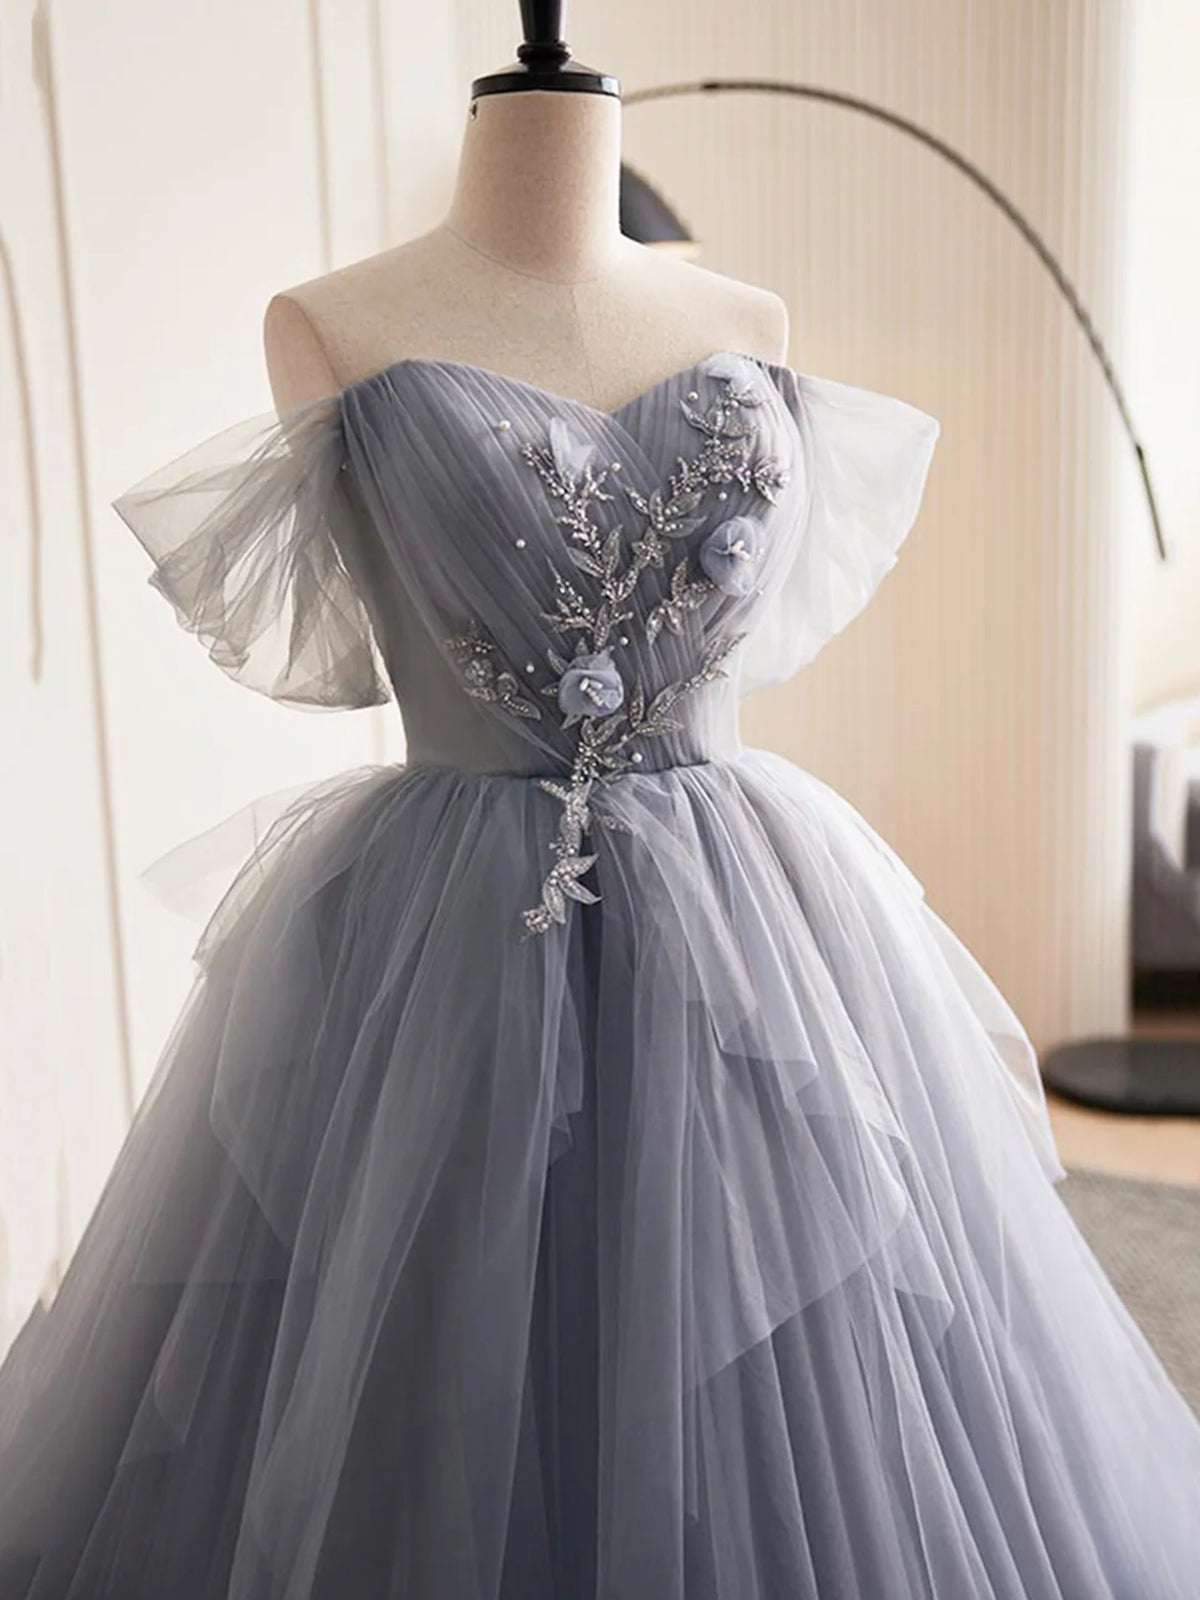 Party Dress Jeans, Gray Tulle Long Floral Prom Dresses, Gray Tulle Long Lace Formal Evening Dresses